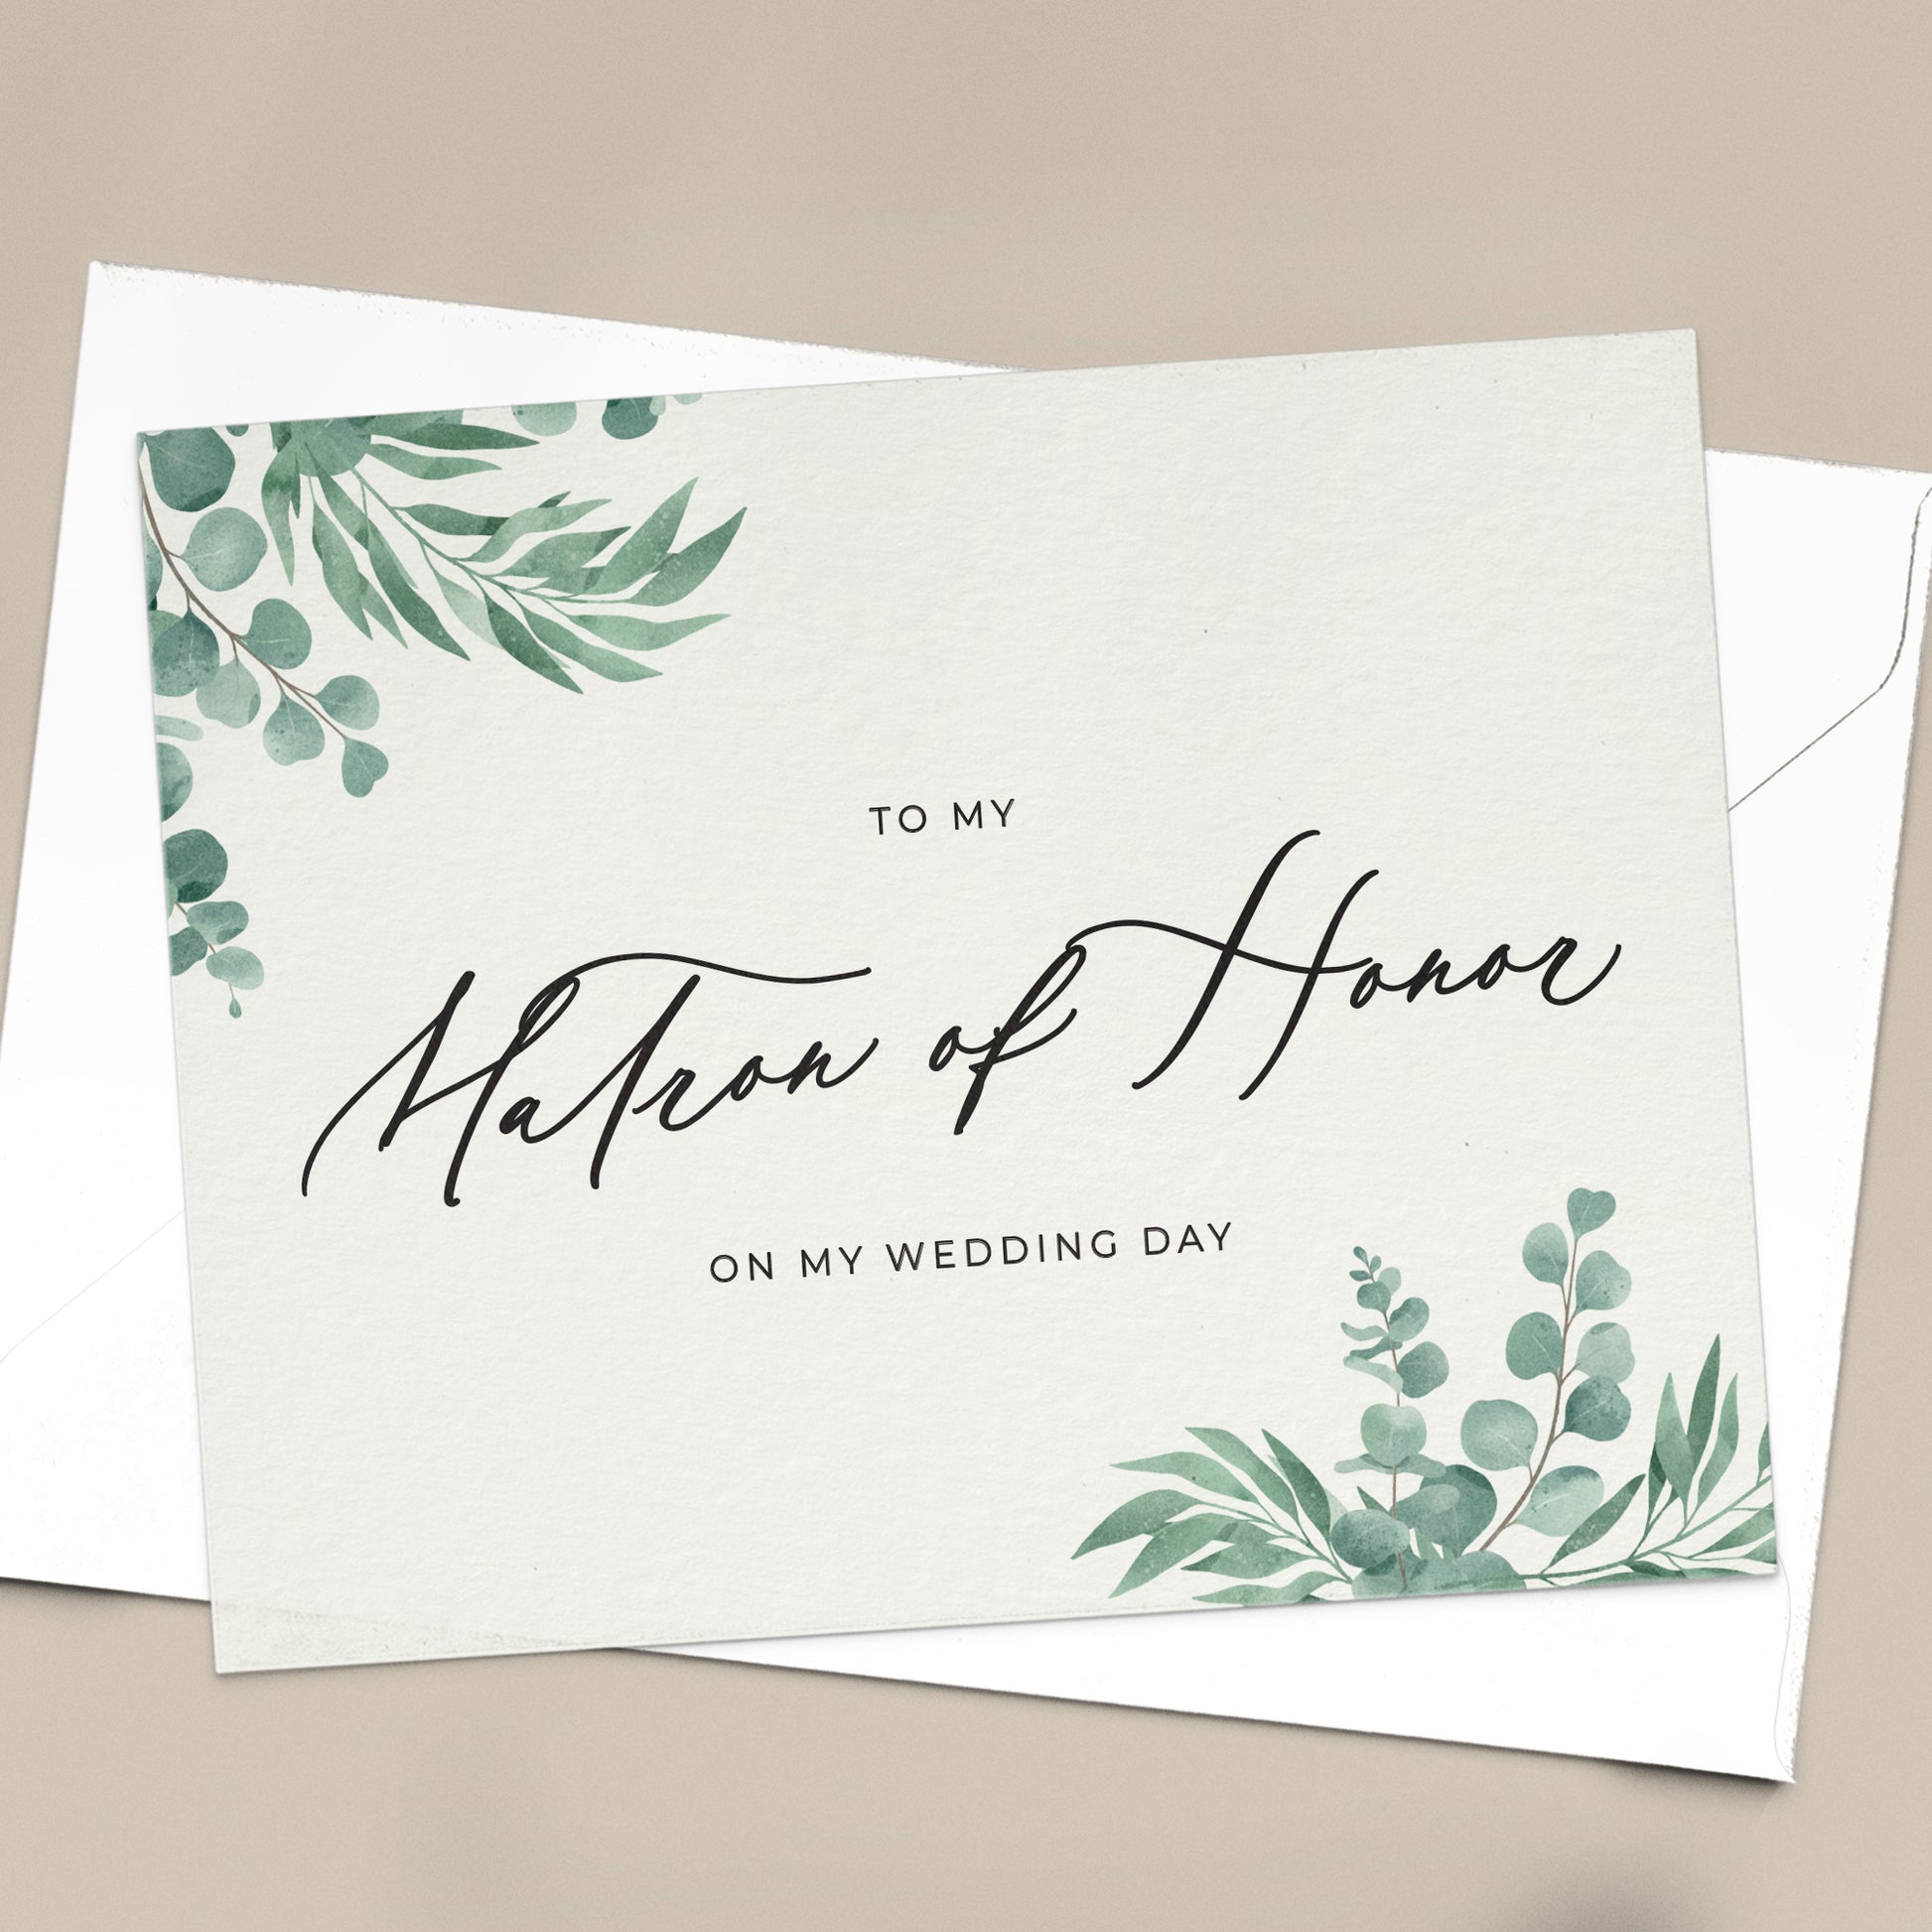 To my matron of honor on my wedding day note card in greenery design with eucalyptus leaves and calligraphy font from XOXOKristen.